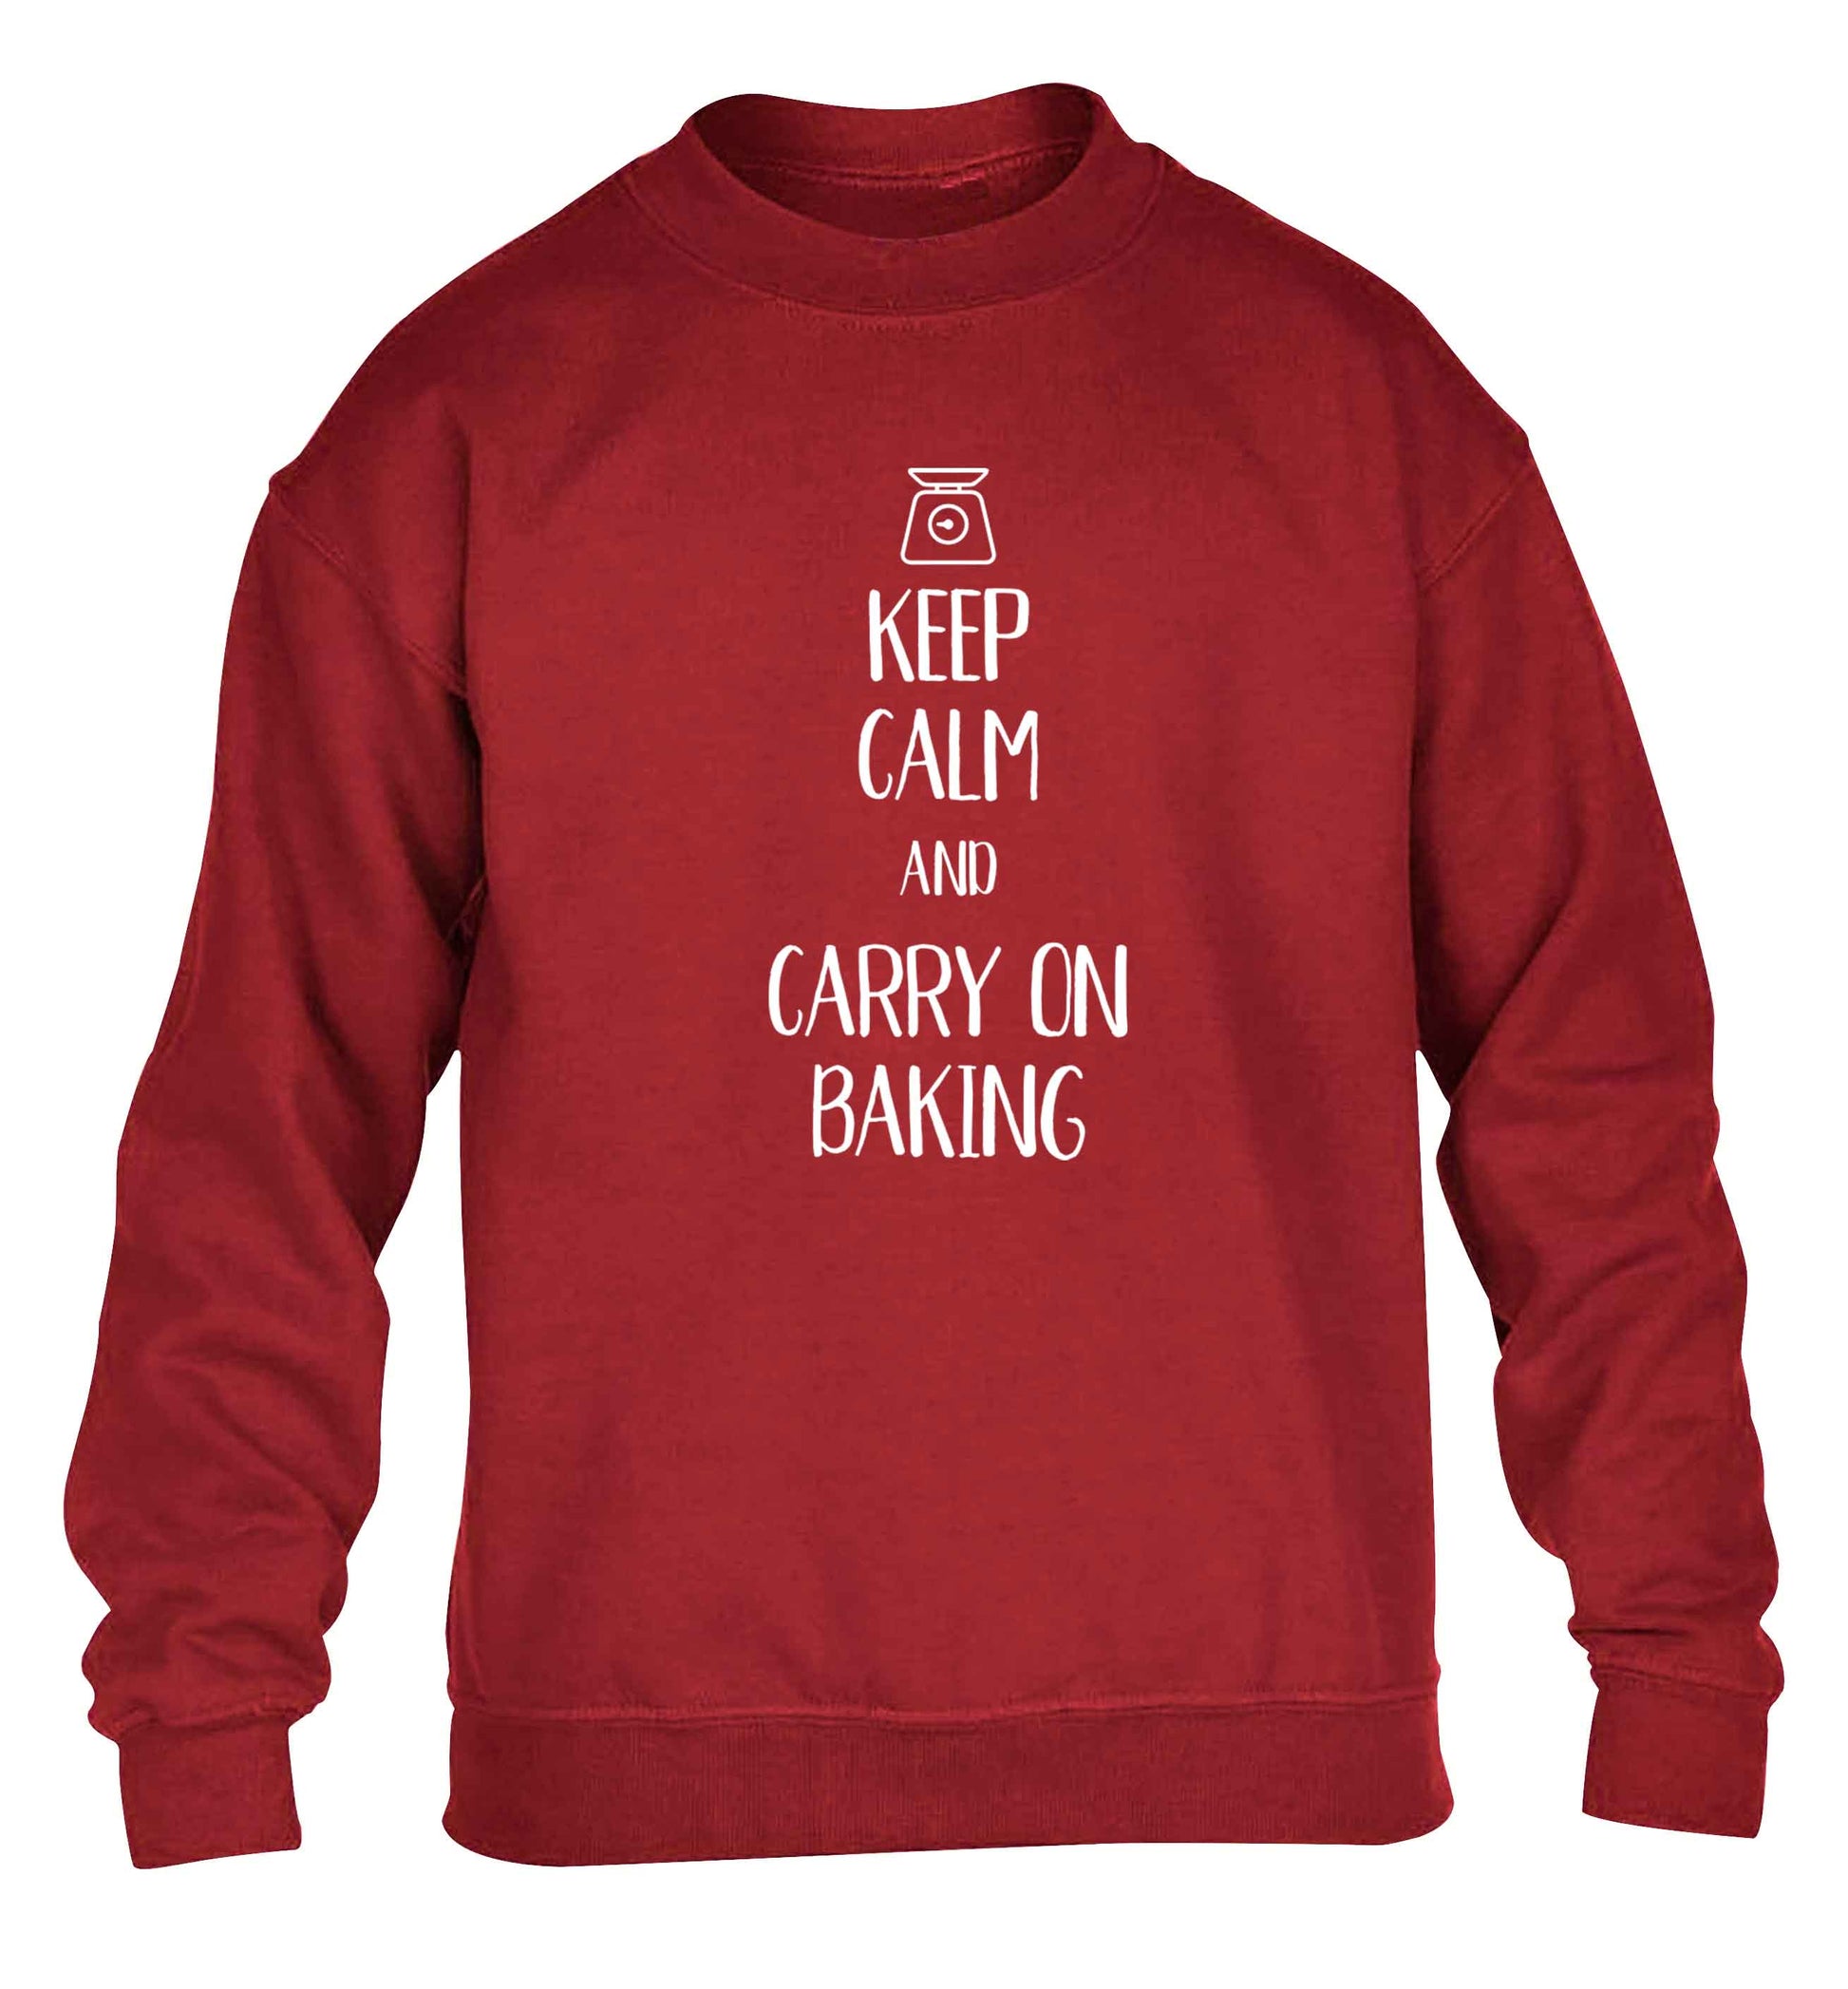 Keep calm and carry on baking children's grey sweater 12-13 Years